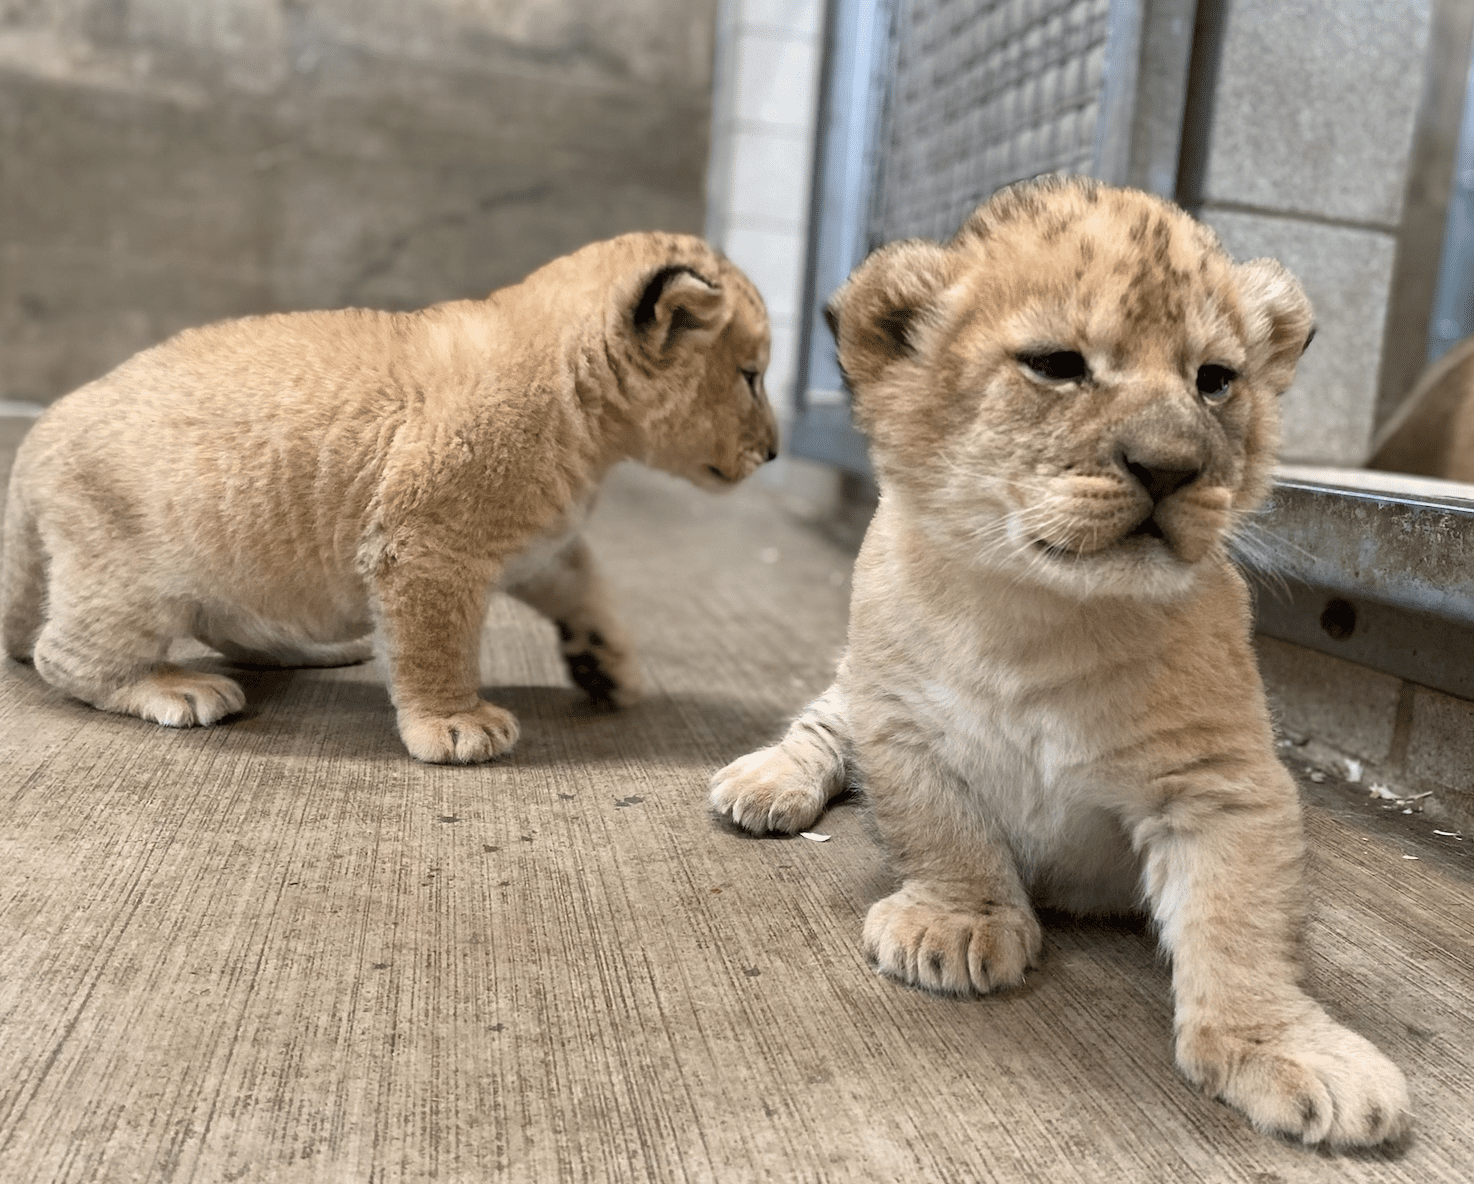 baby lions in the wild